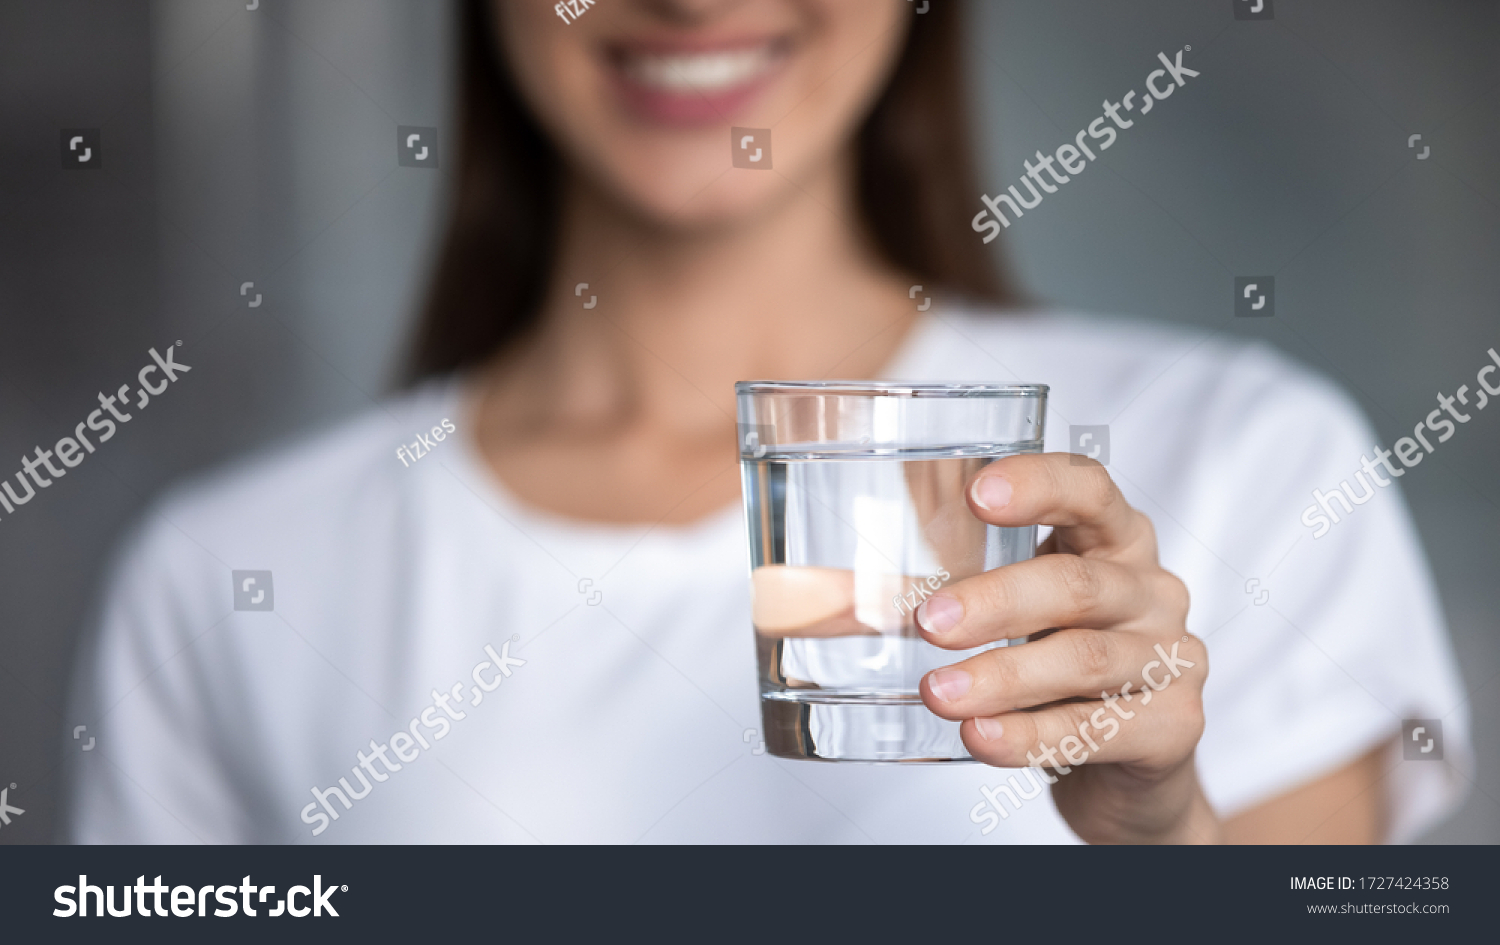 Horizontal banner image, on foreground caucasian female hand holds glass of clear water give to camera smiling selective close up focus. Concept of healthy lifestyle, beauty skin health care treatment #1727424358